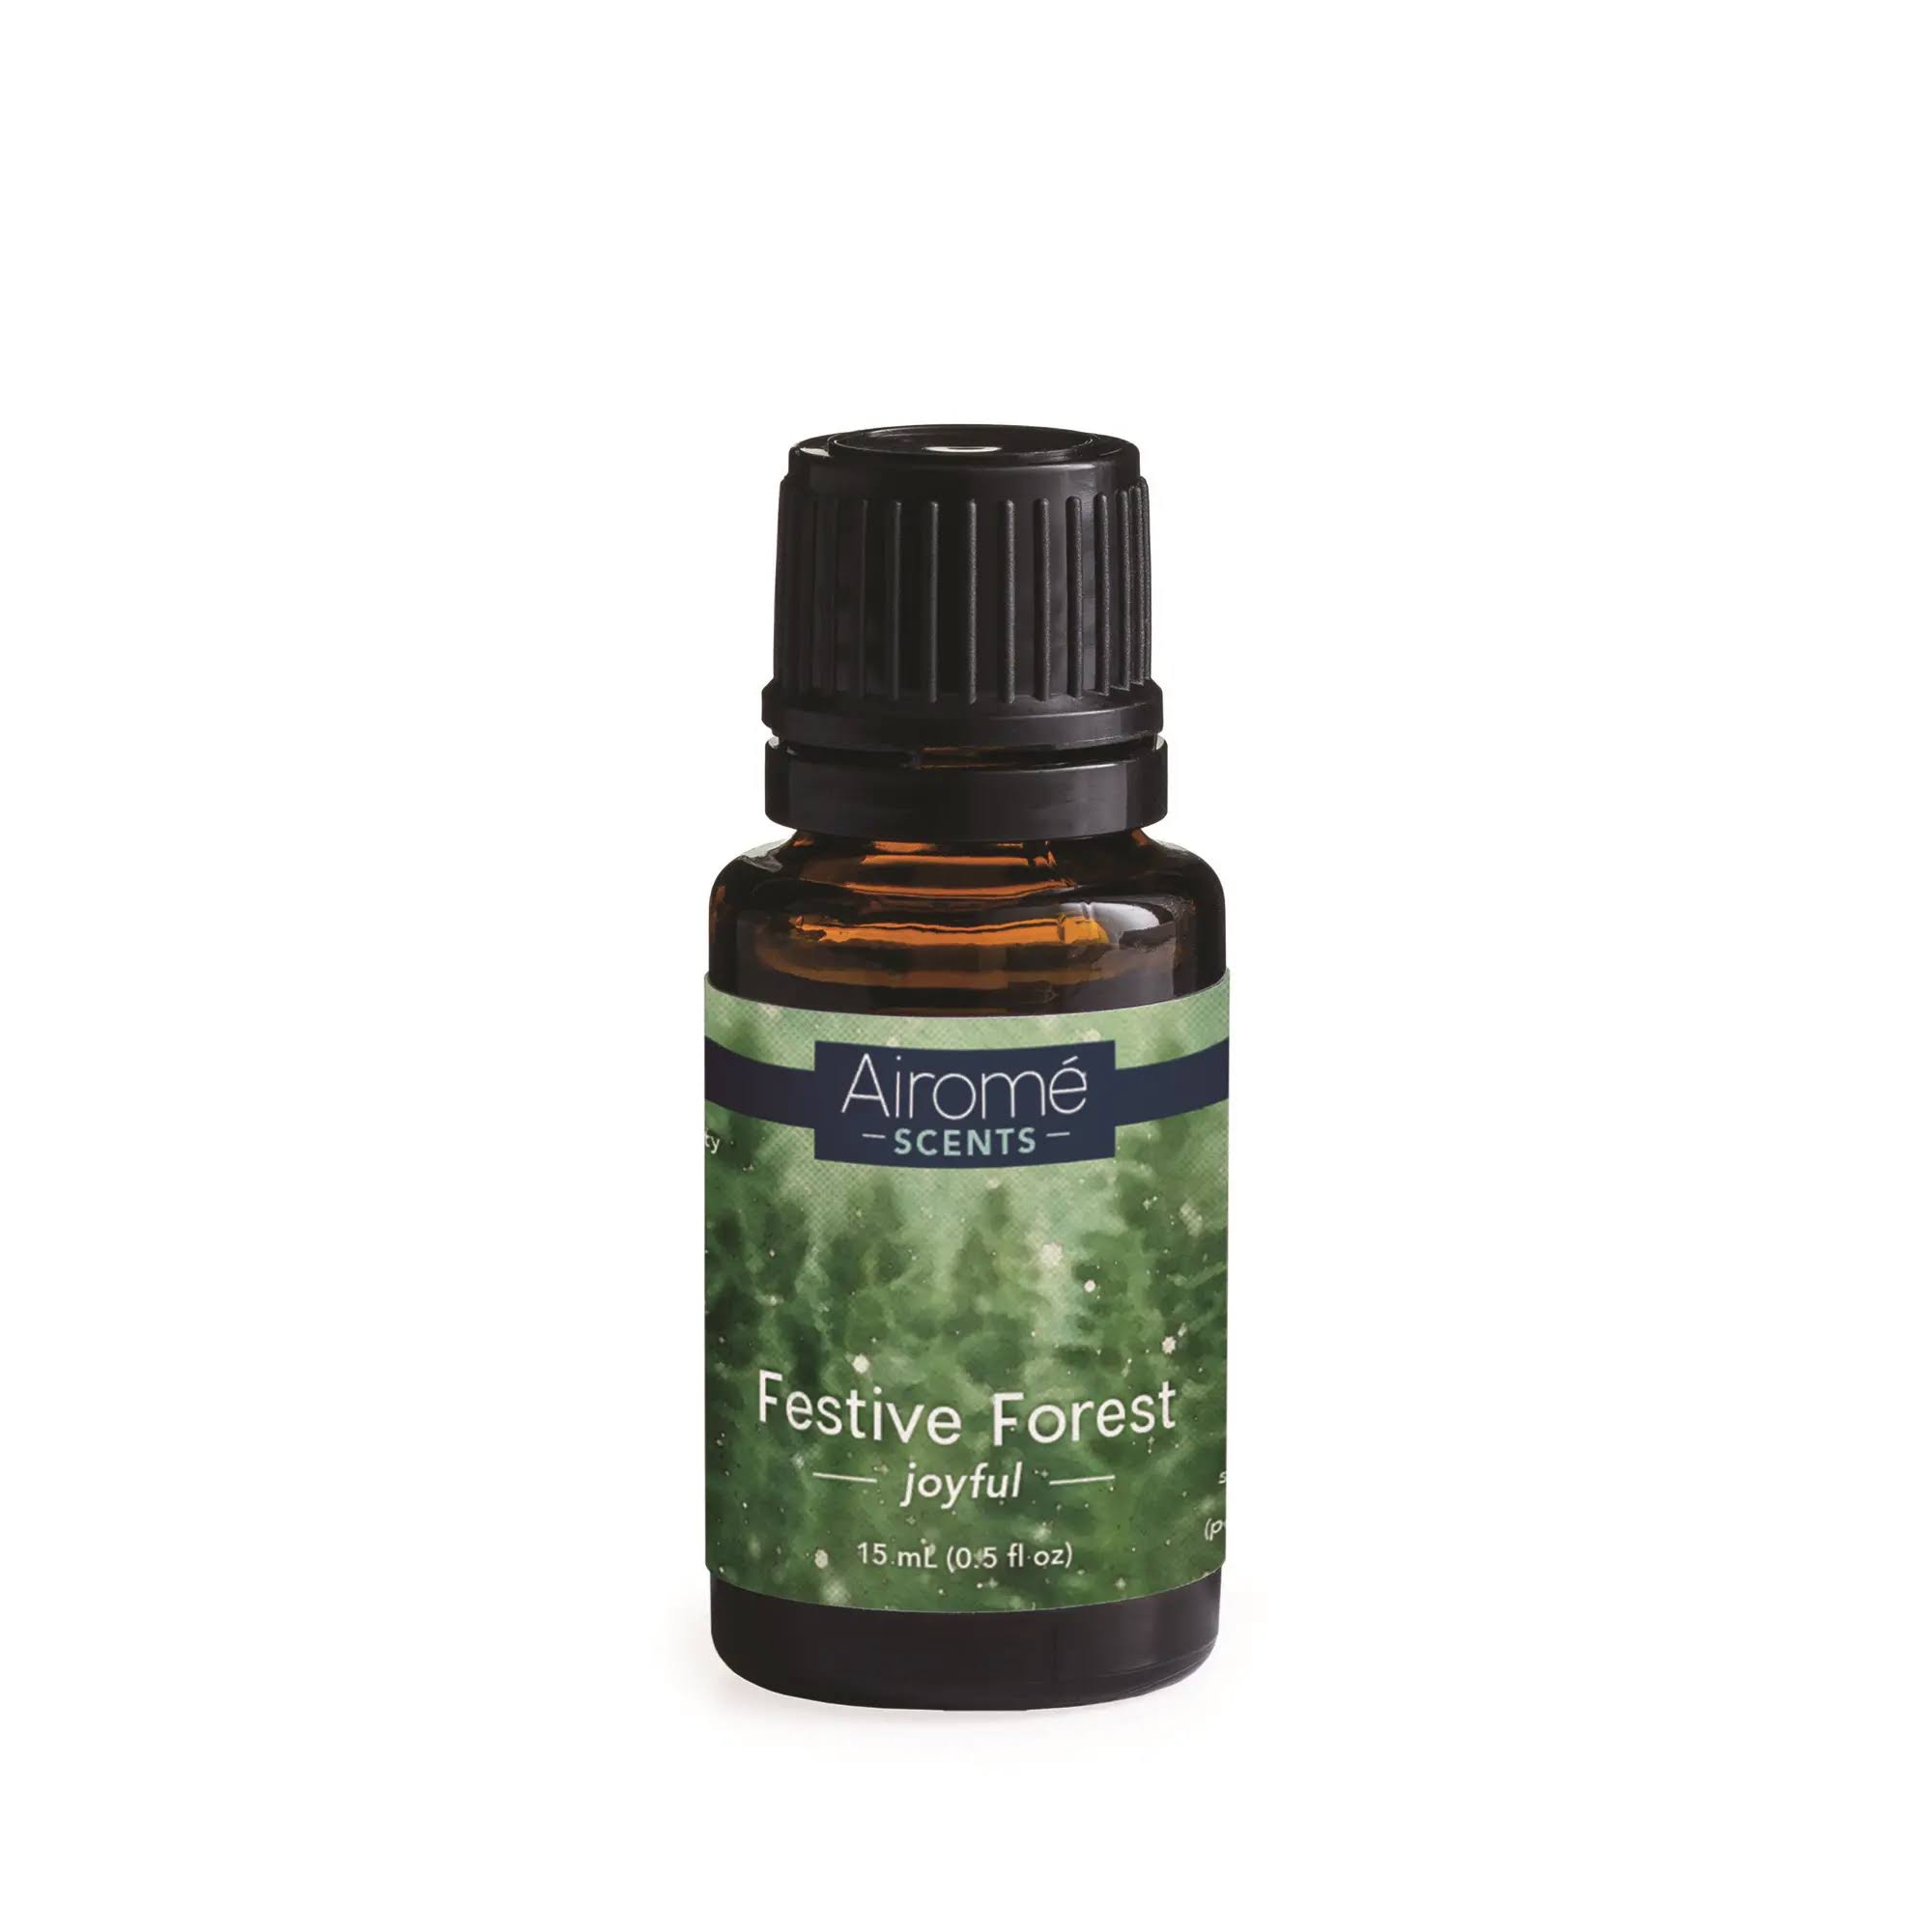 Airome Festive Forest Essential Oil Blend